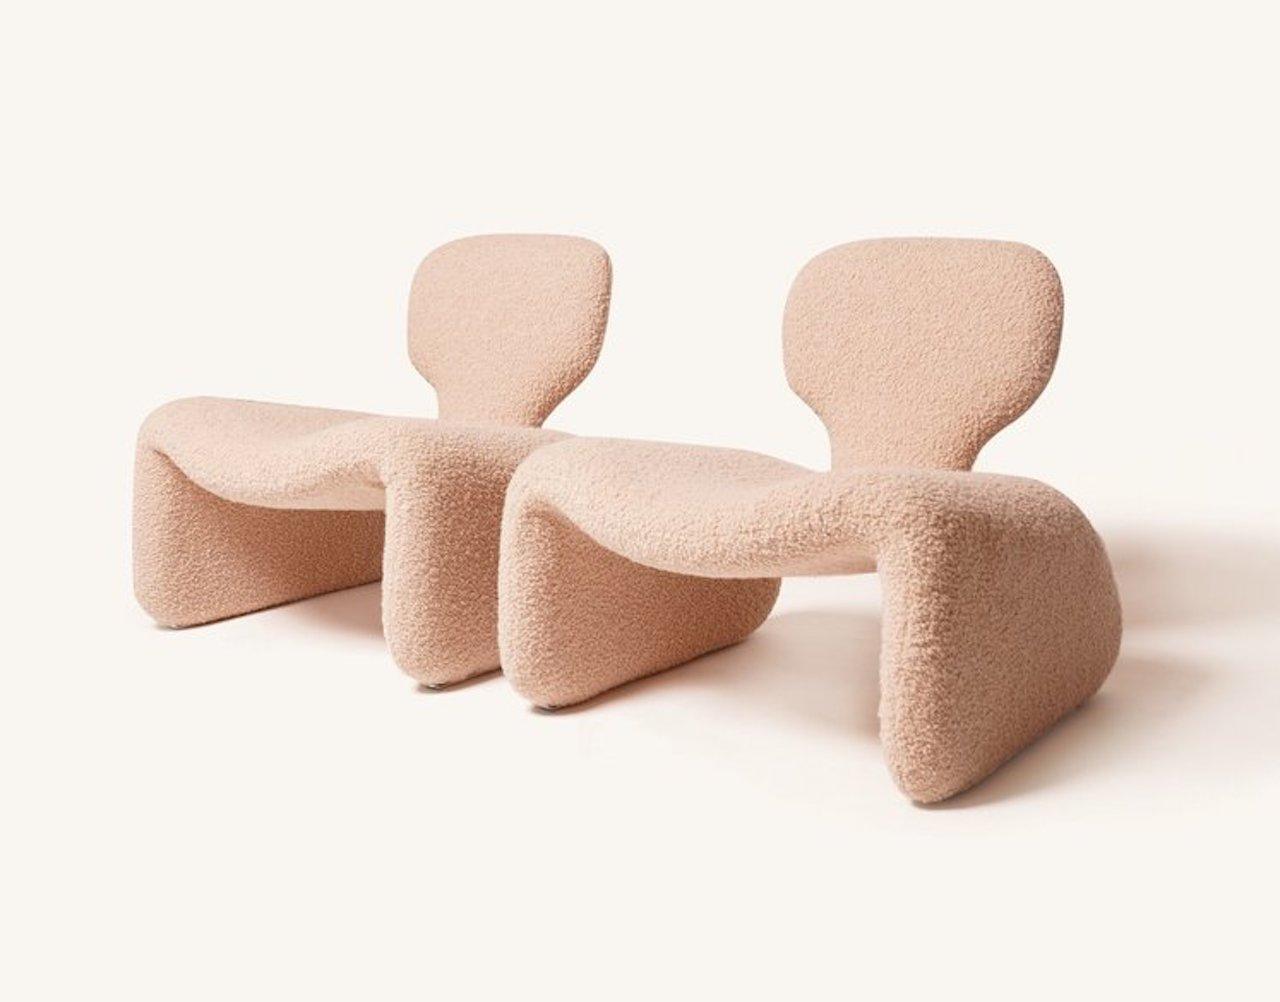 These Olivier Mourgue “Djinn” lounge chairs were true innovations in furniture design. Inspired by functionality and Islamic mythologic design which featured curvy shapes, Morgue’s “Djinn” chairs were simplistic yet futuristic in design. These